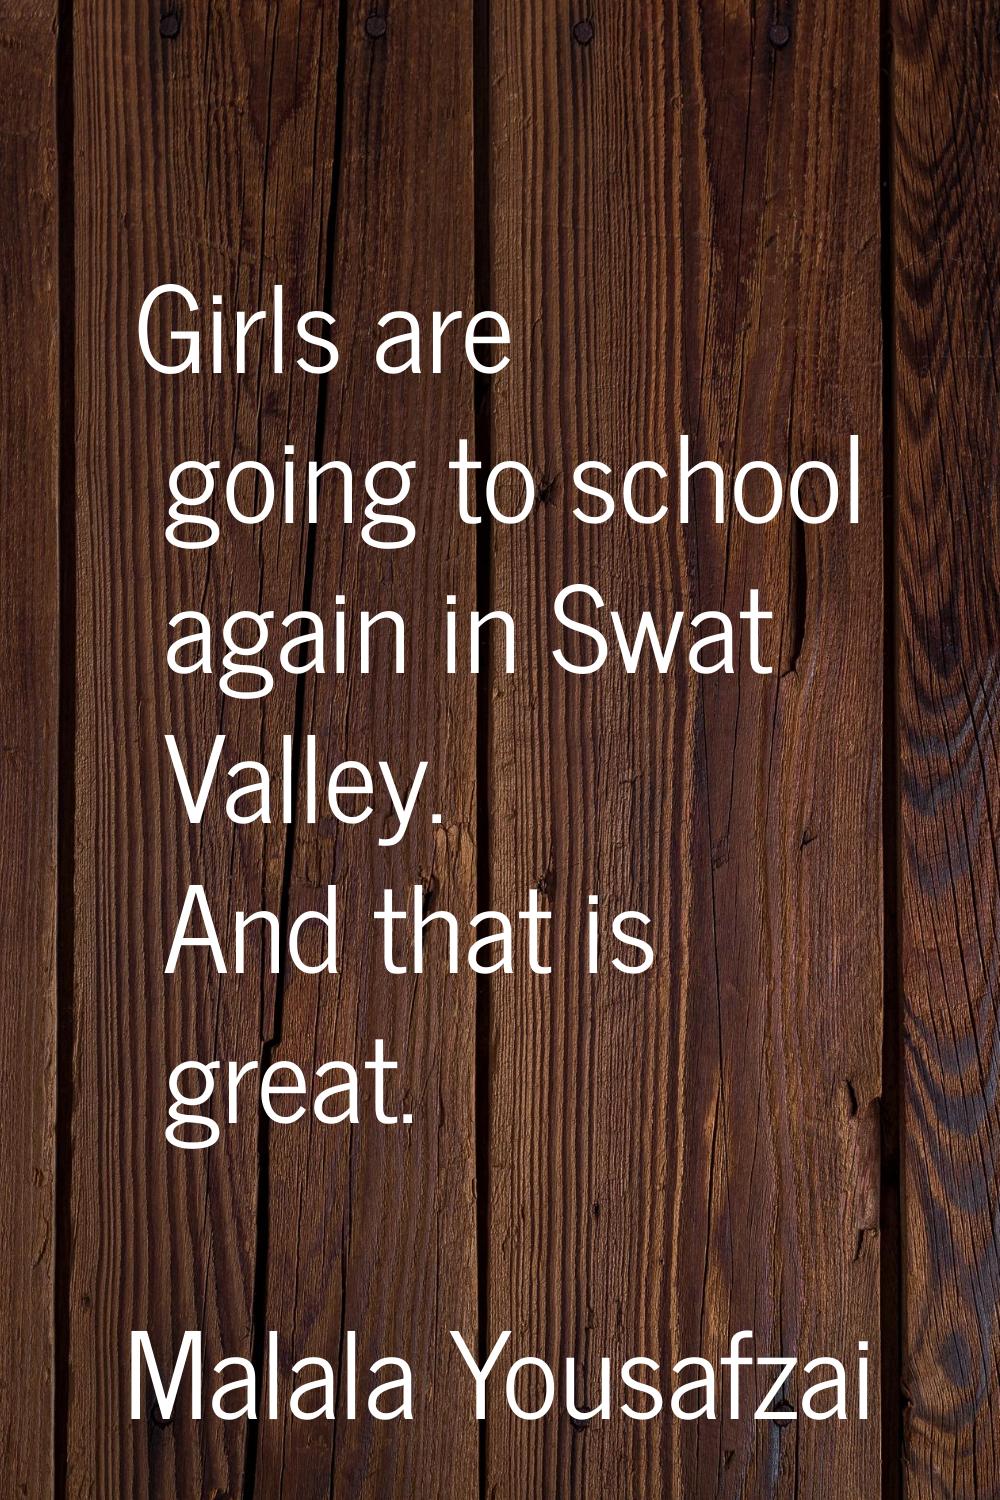 Girls are going to school again in Swat Valley. And that is great.